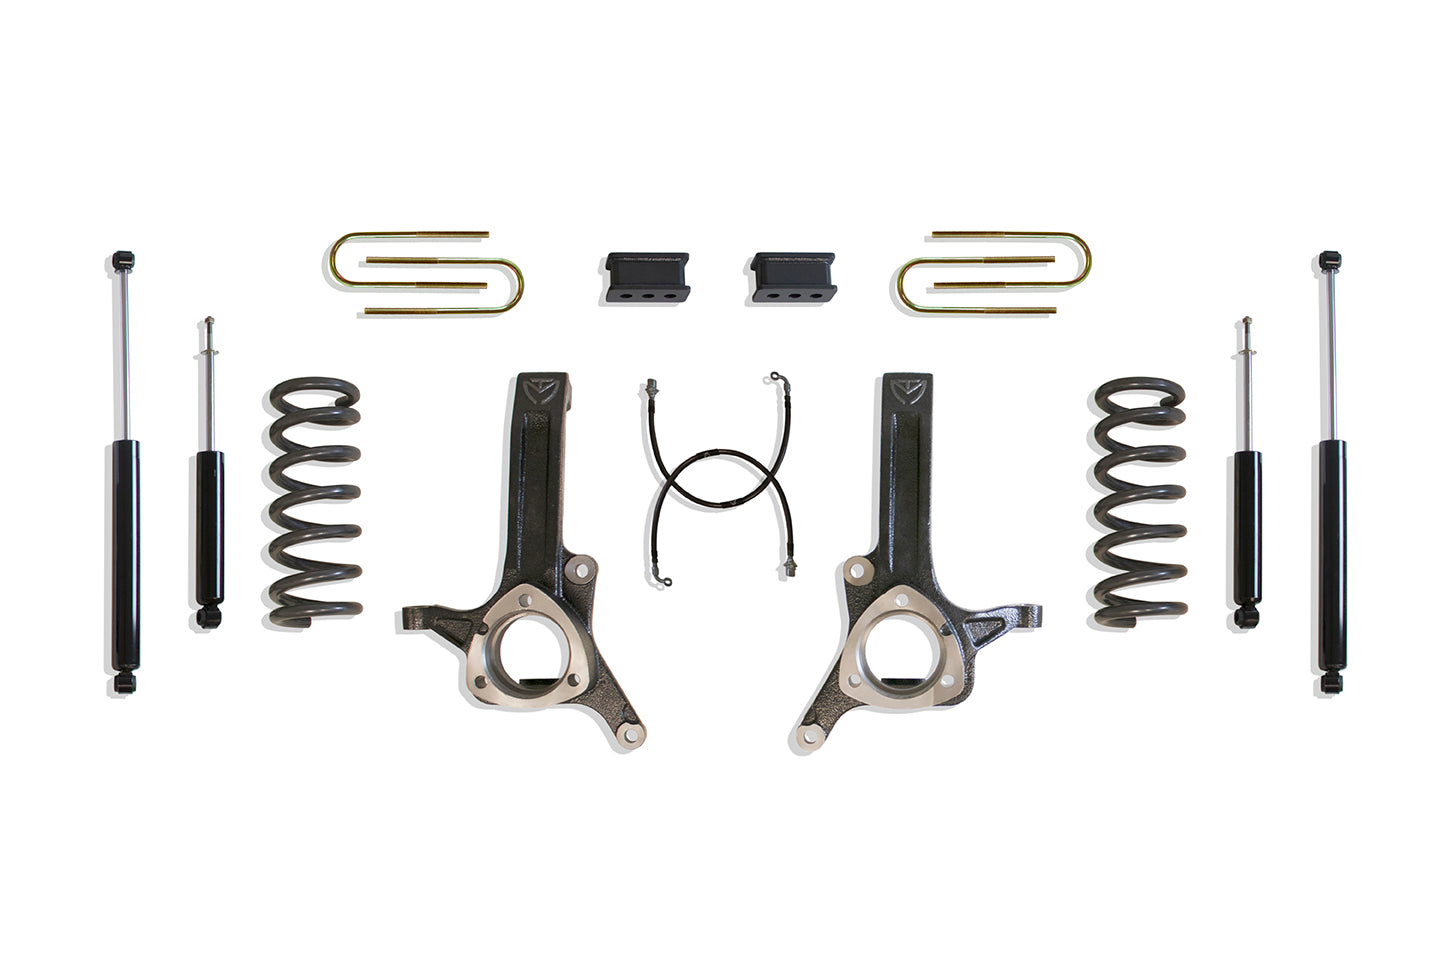 MaxTrac Suspension 6.5" Lift Kit Including Diesel Coils Spindles Extended Brake Lines Blocks 3.625" Wide U-Bolts & Front Rear Max Trac Shocks K882262L